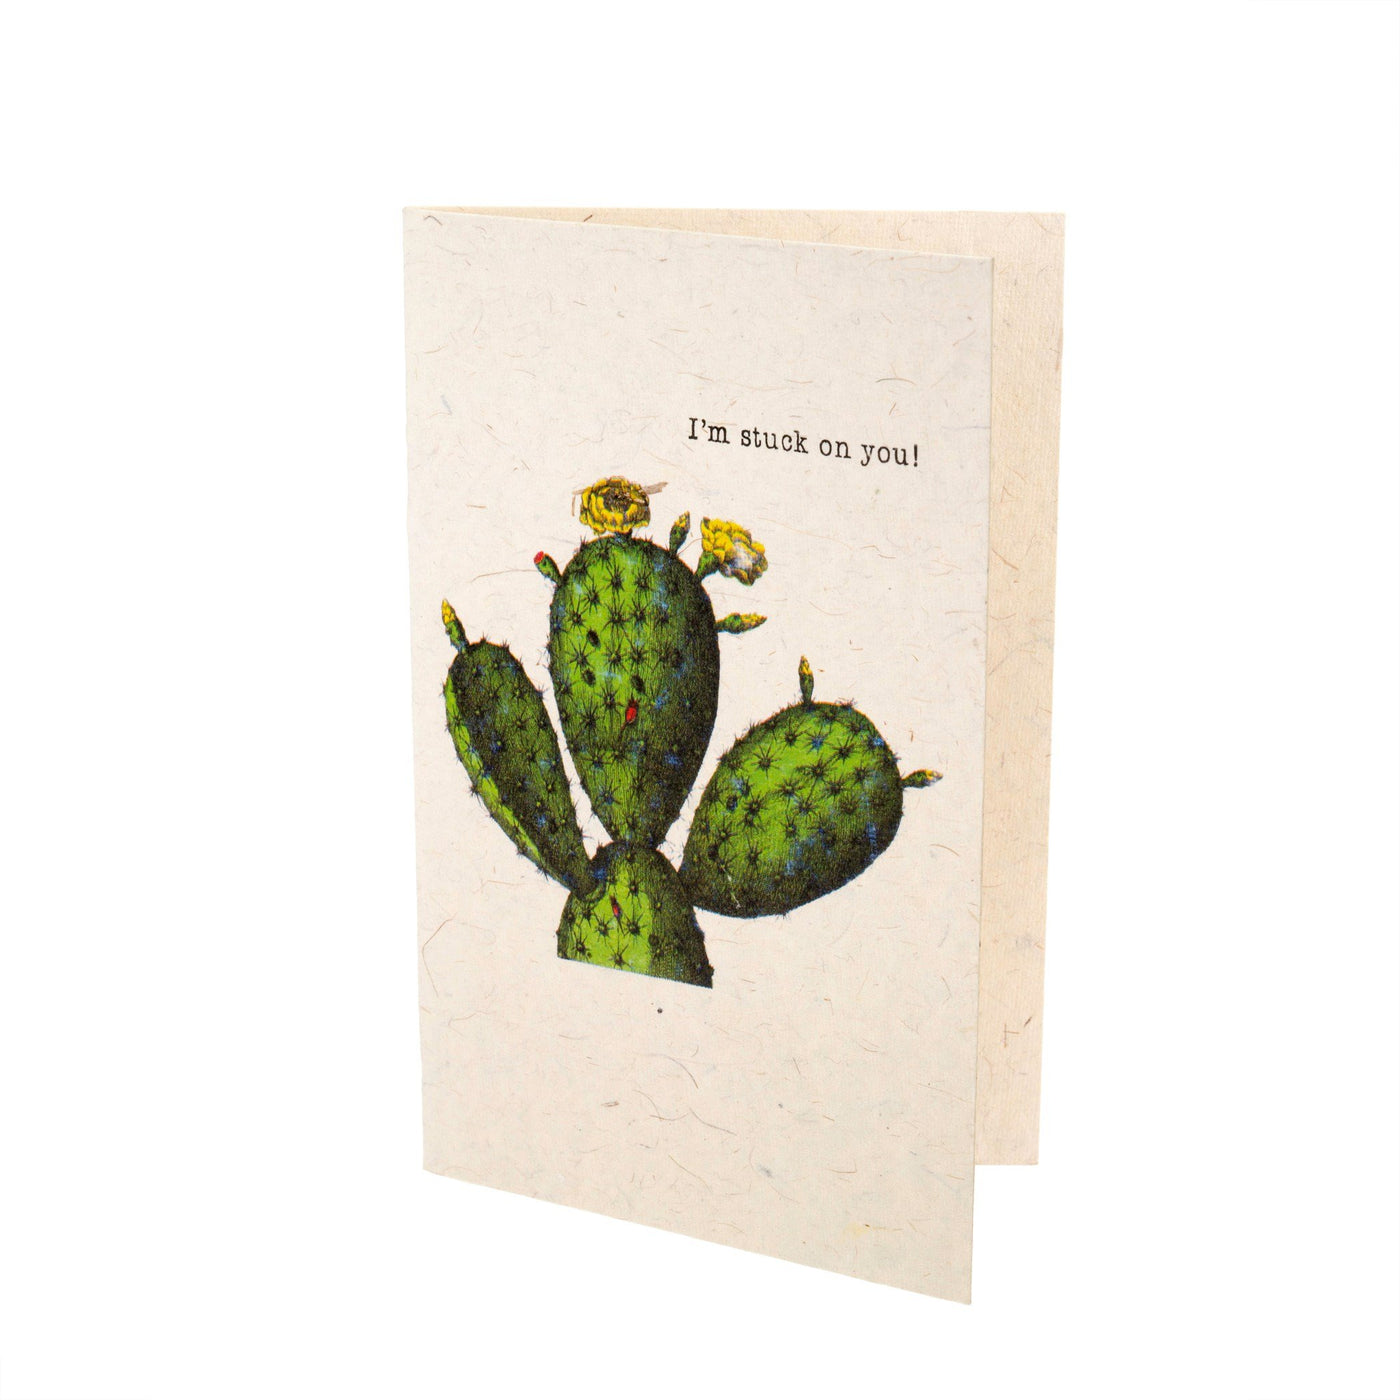 Stuck on You  - Quirky Card